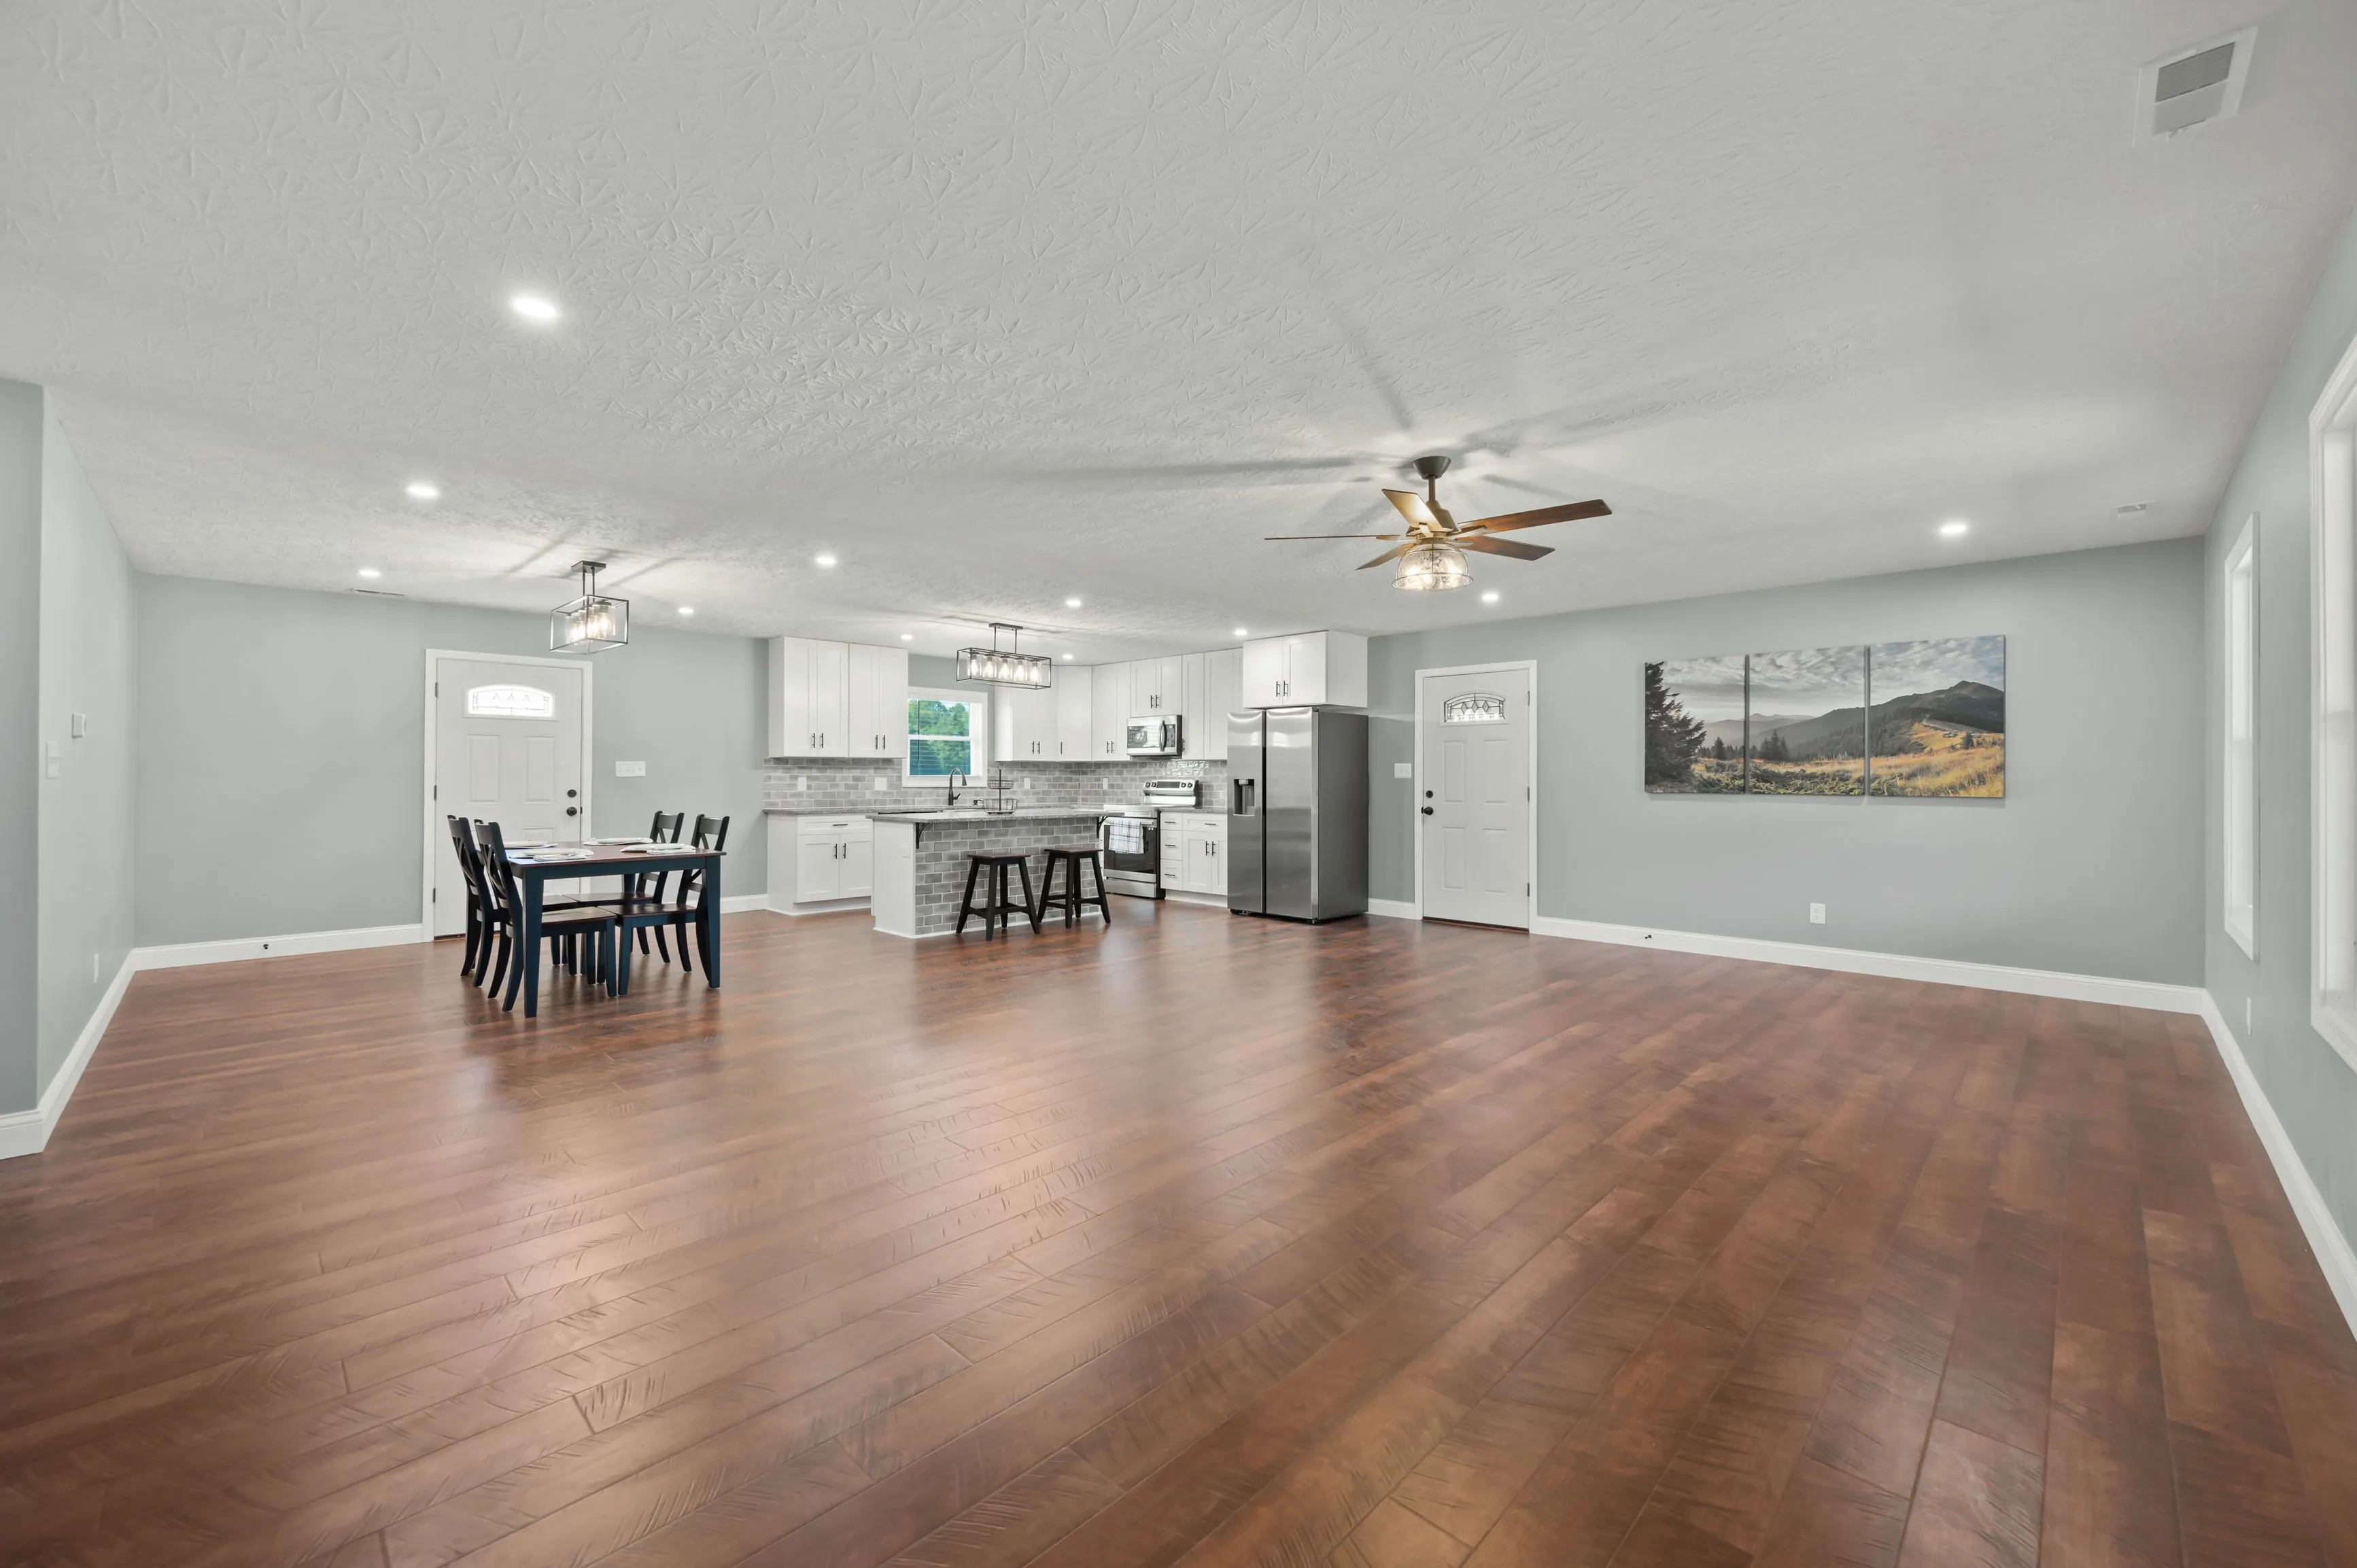 Spacious modern kitchen with white cabinetry and appliances connected to dining area with a dark wooden table and chairs, polished hardwood floors, overhead lighting, and a landscape painting on the wall.